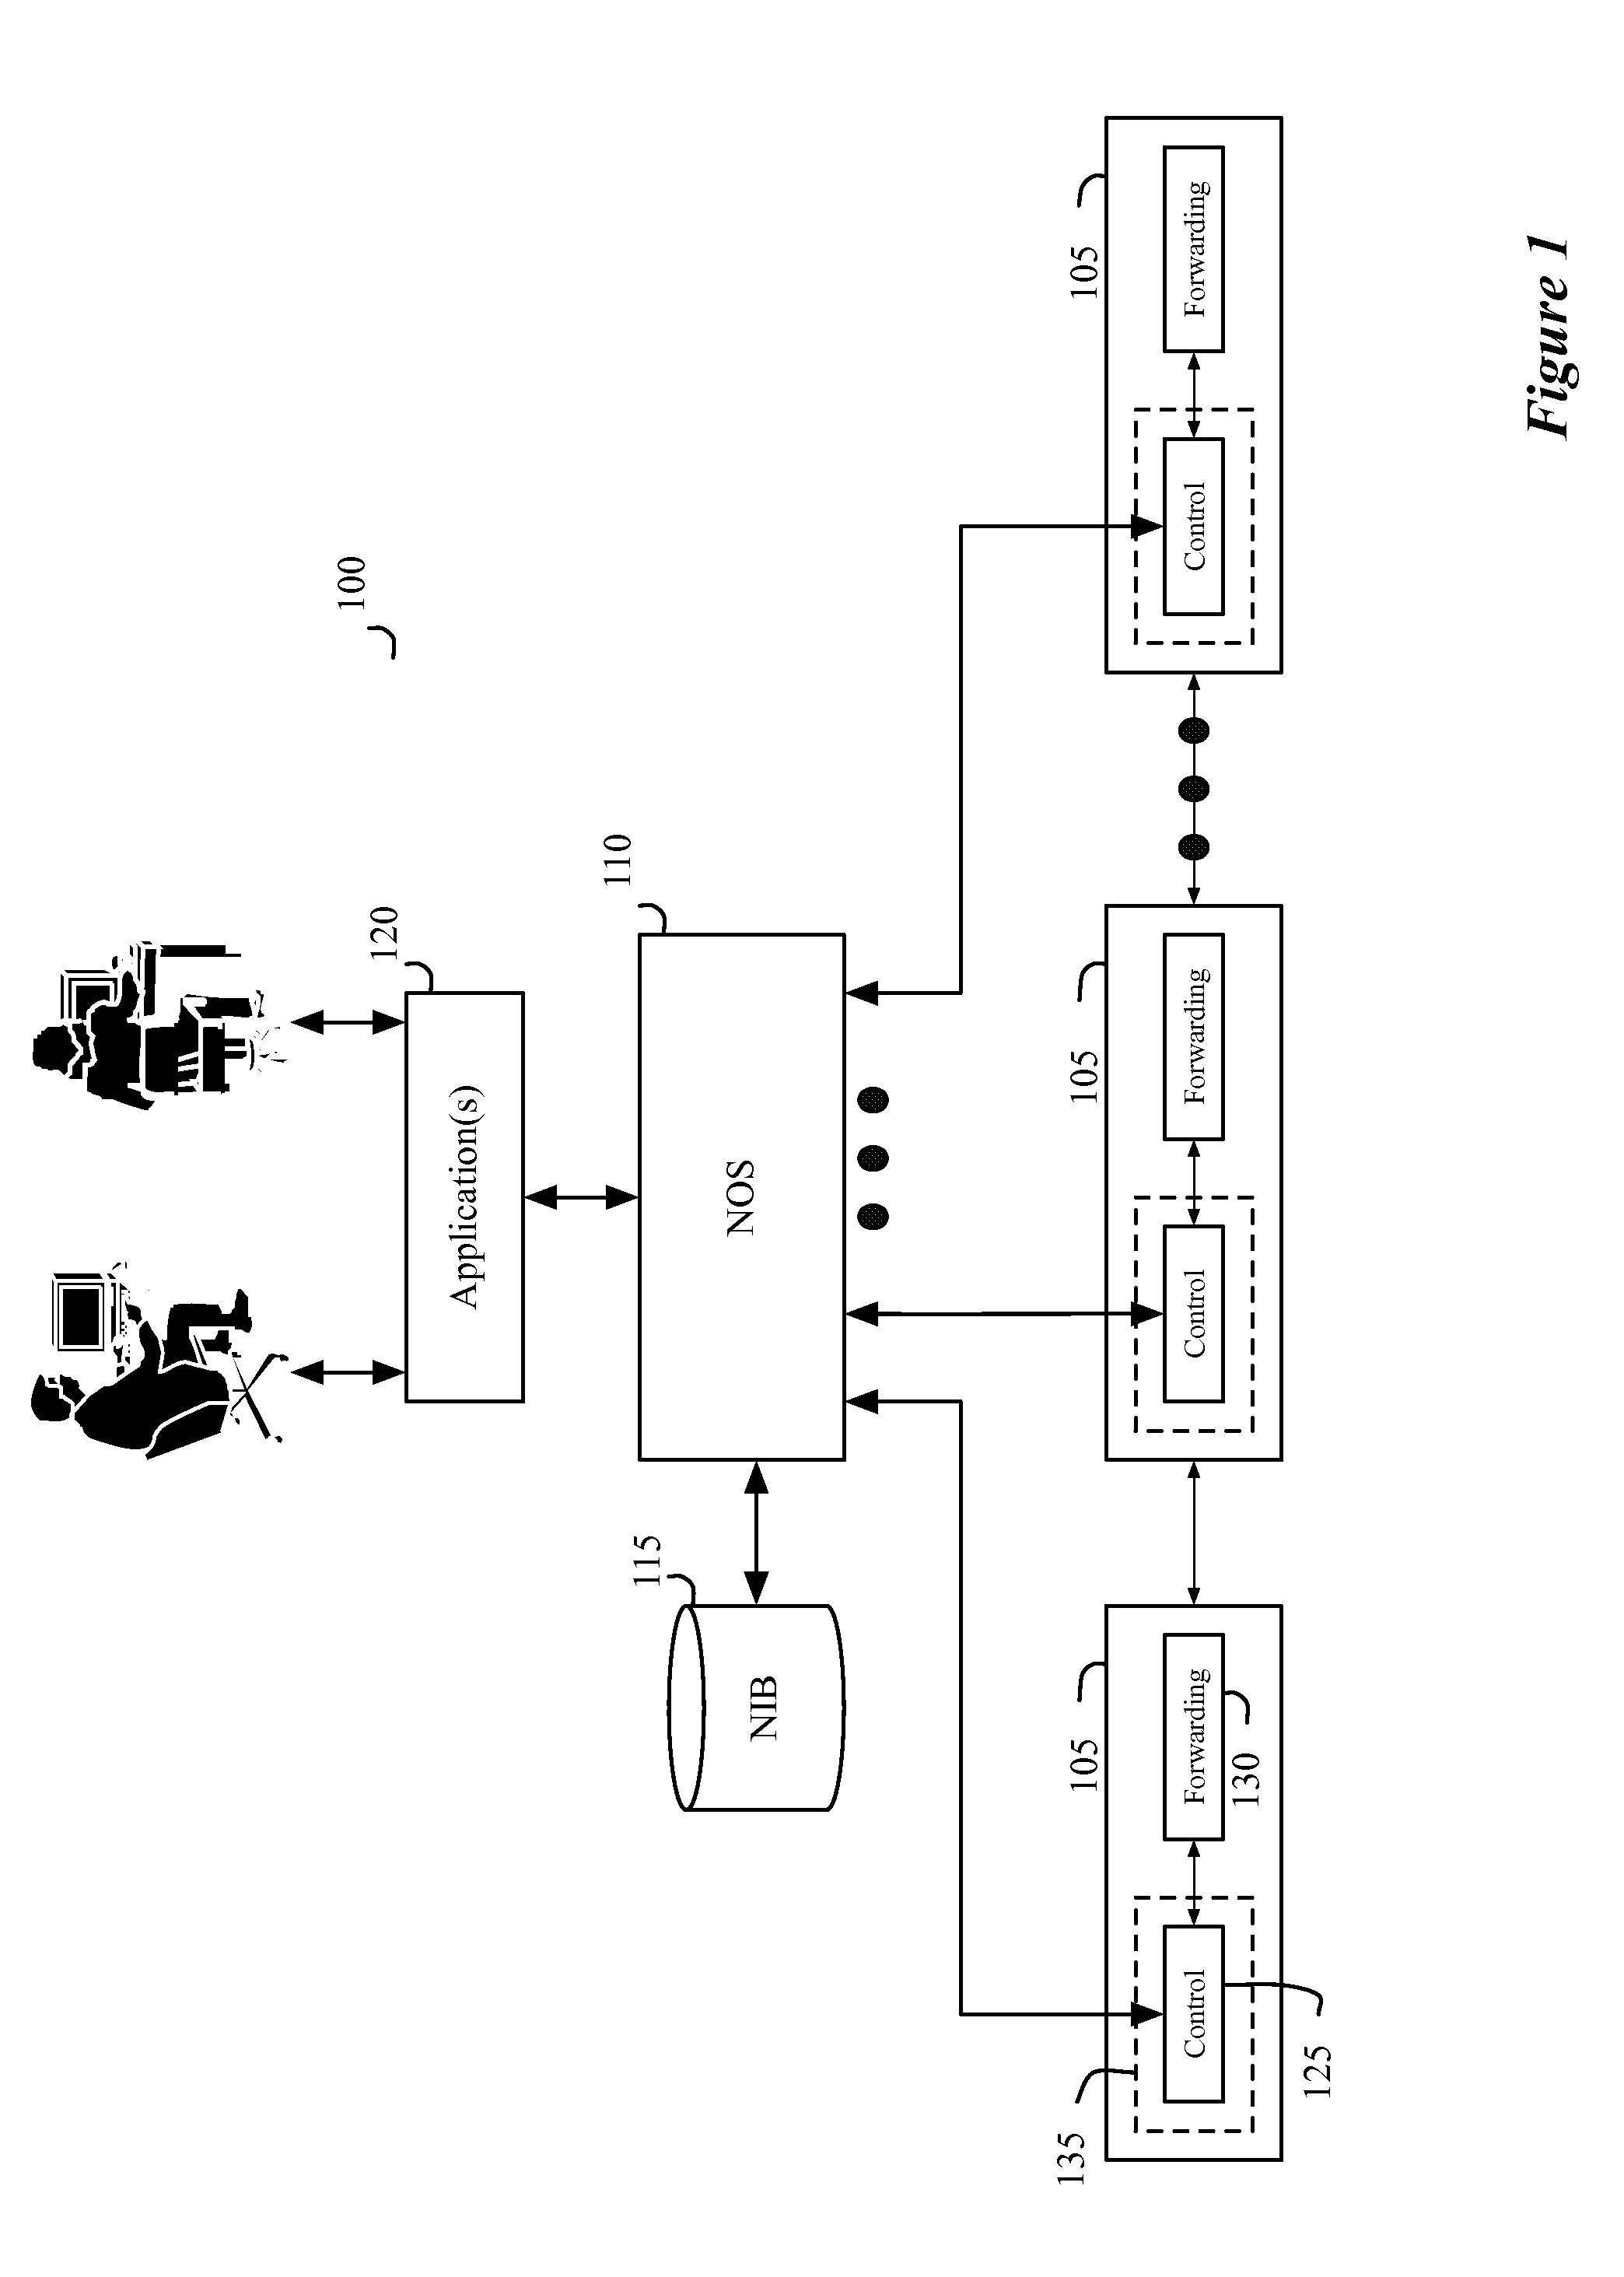 Distributed network control system with a distributed hash table